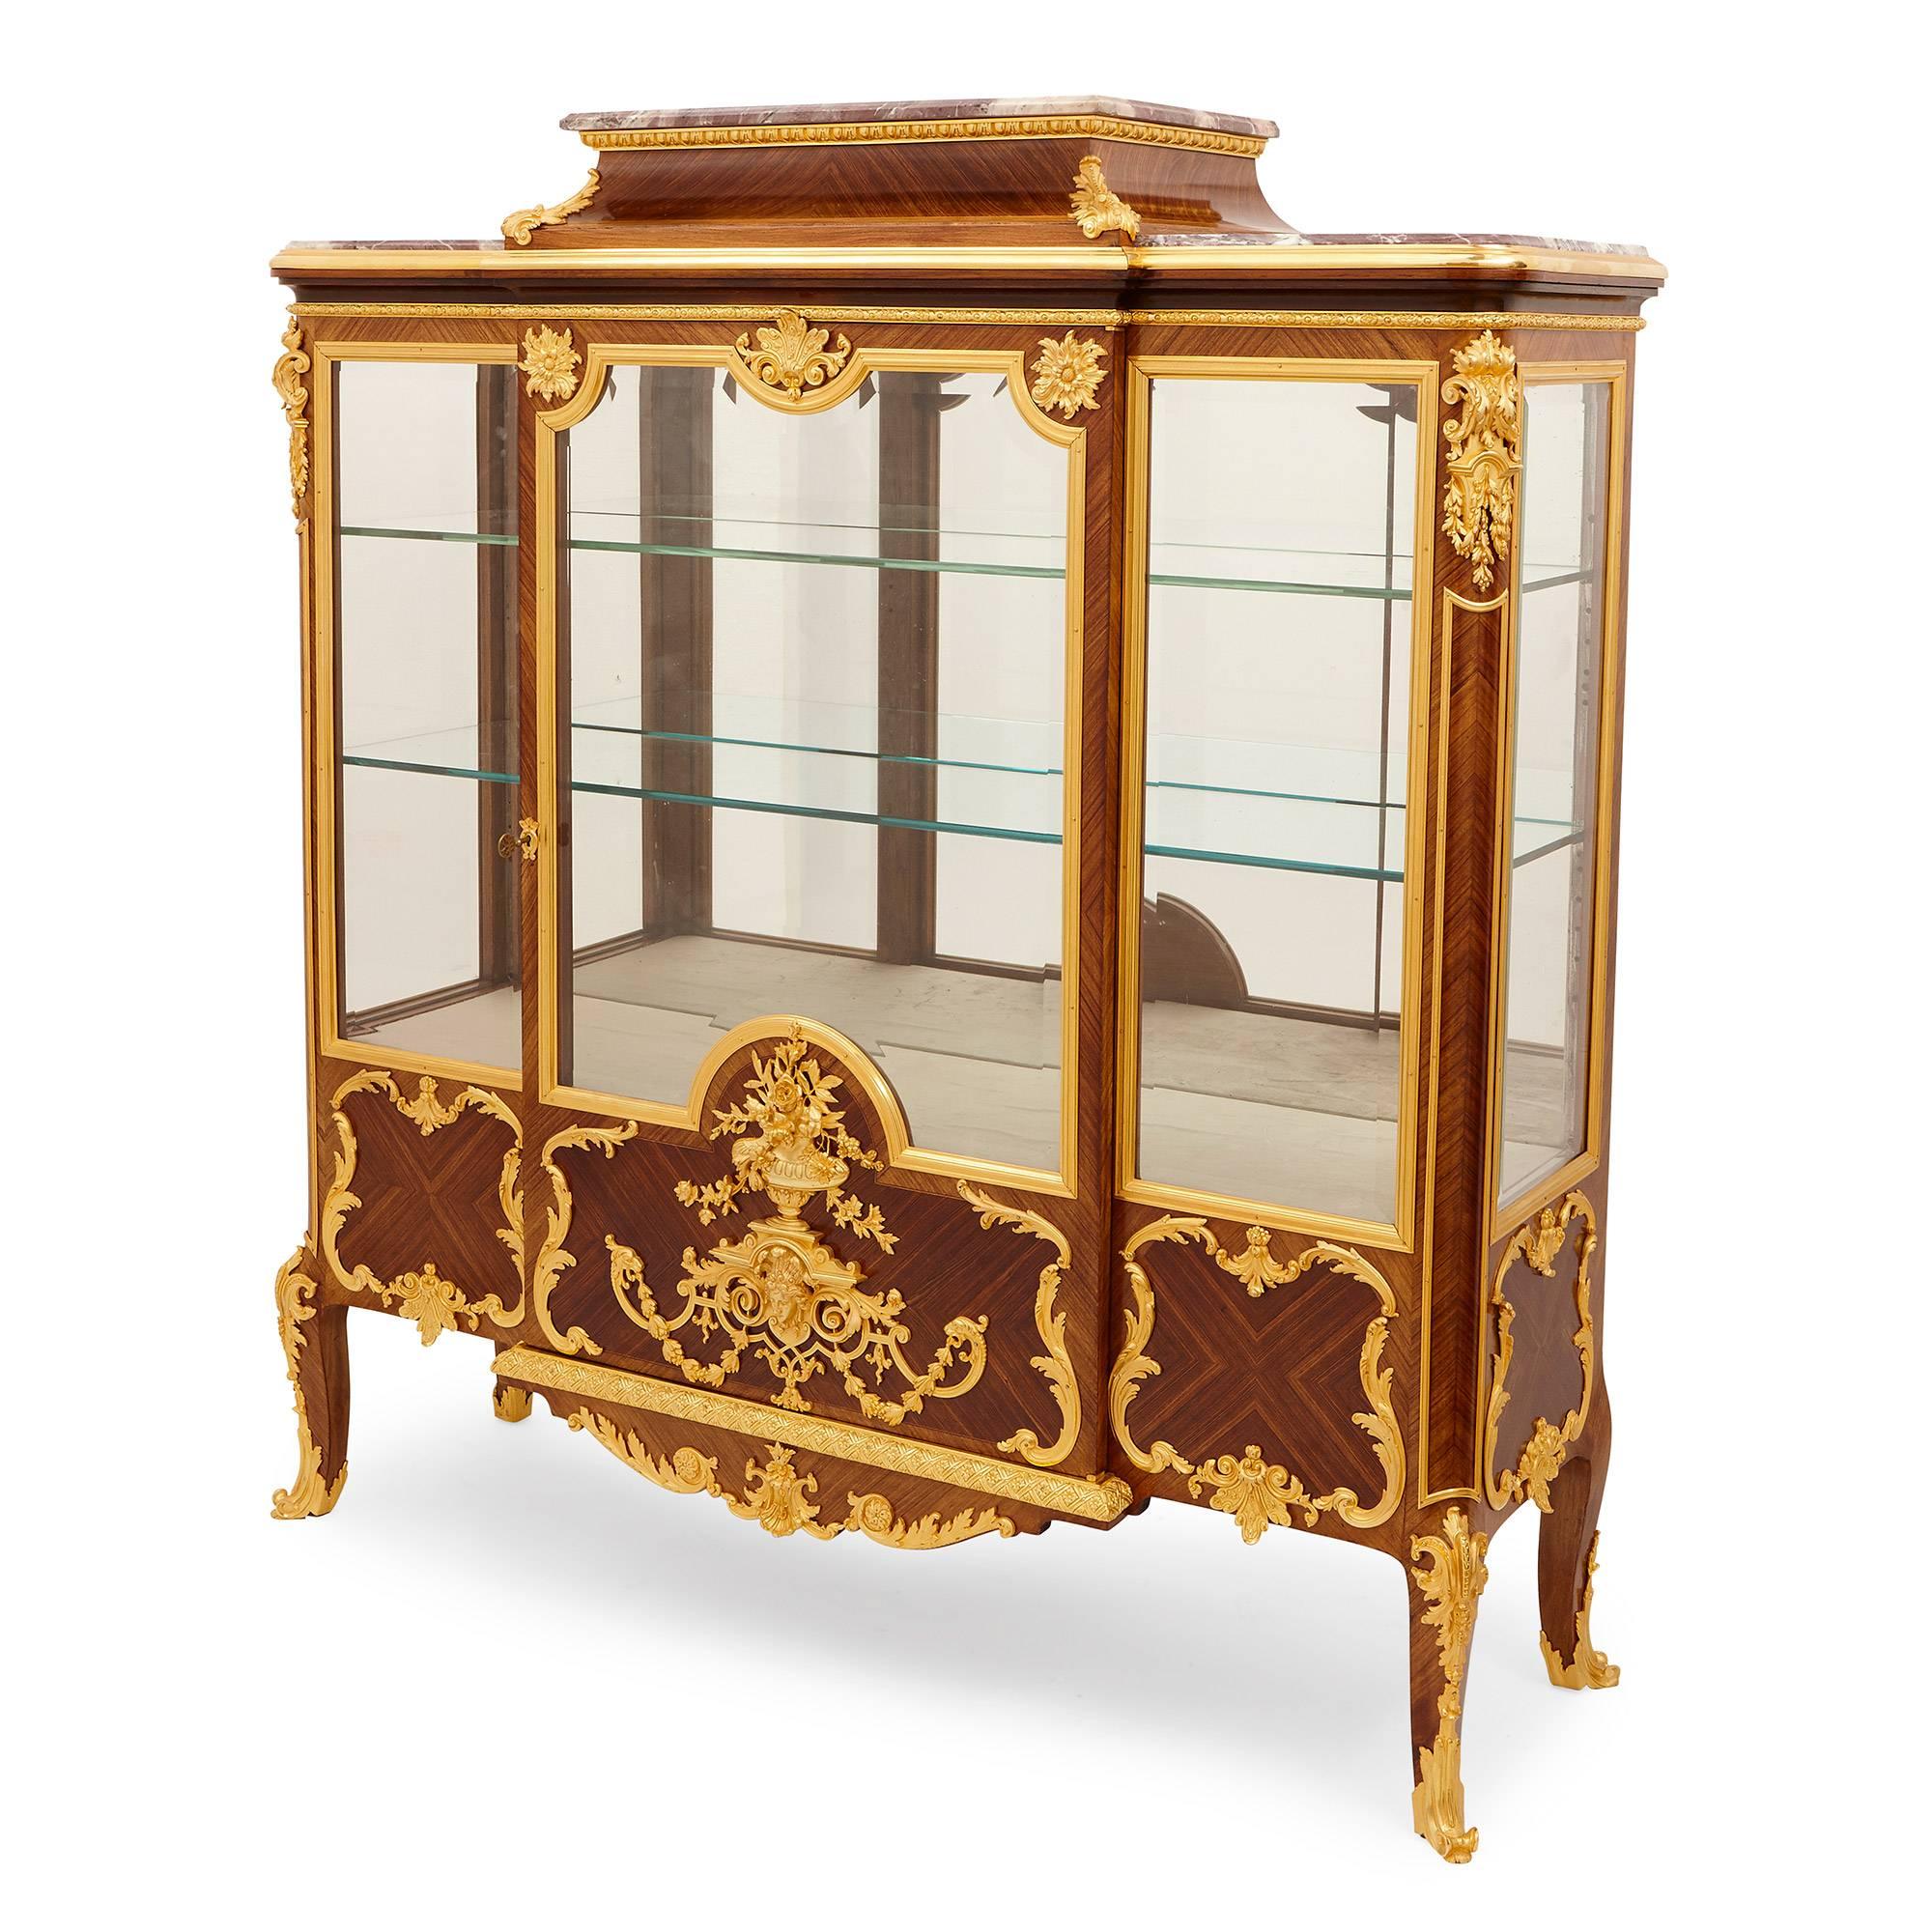 The cartouched door frame mounted with acanthus and ornate floral motifs enclosing two glass shelves and a mirrored back flanked by two smaller glaze panels, ormolu casts and a cartouche frame mounted below, with shaped cabriole legs on ormolu